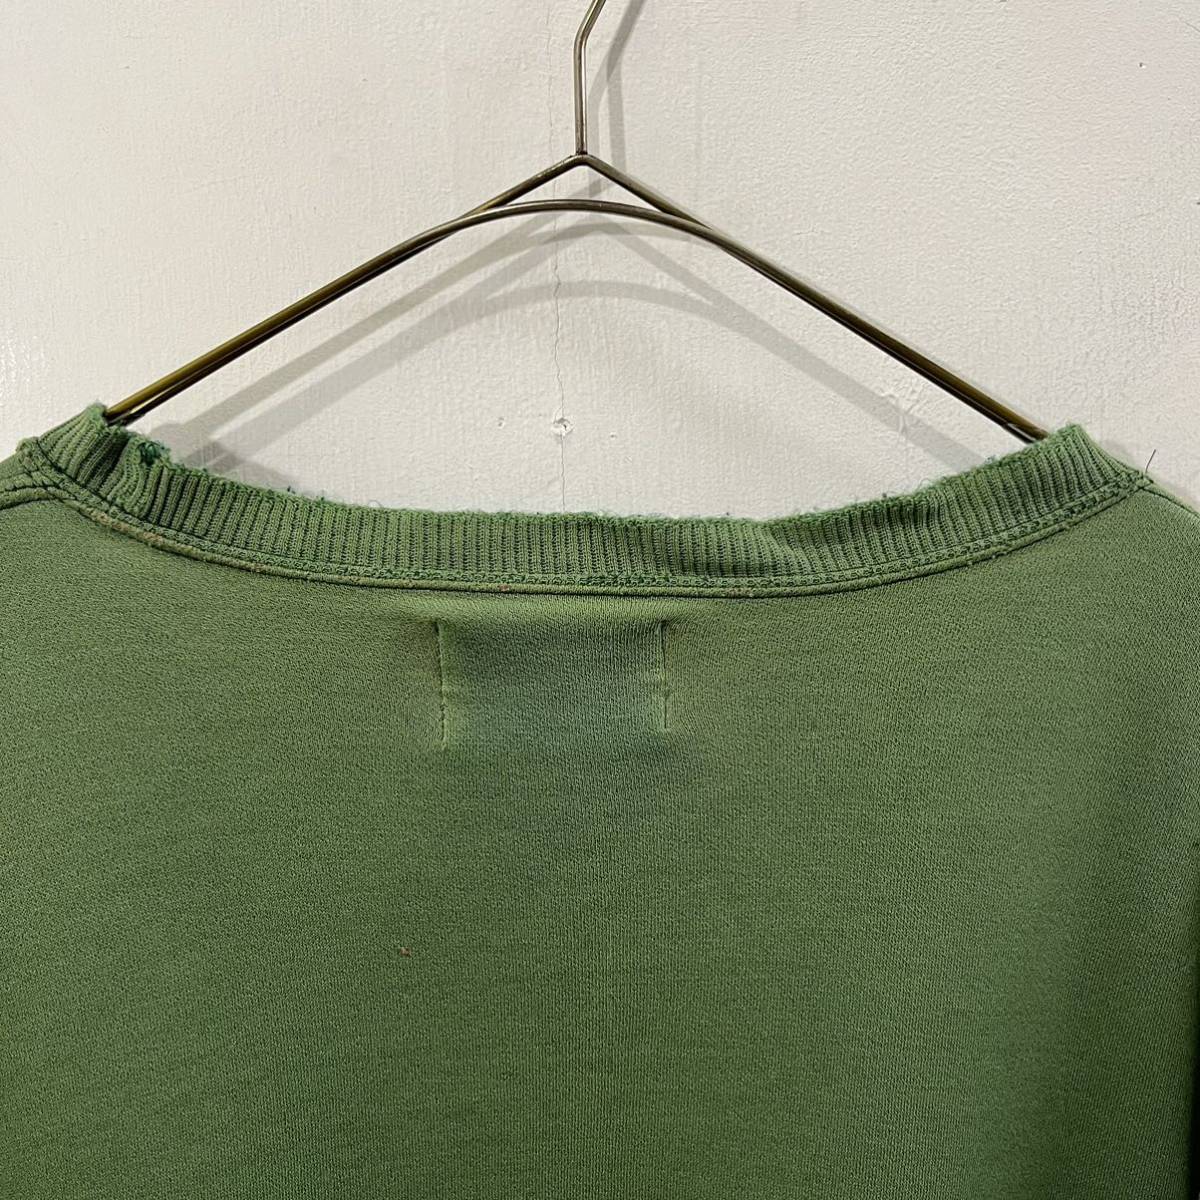 80s VINTAGE KENZO JEANS north . tag sweat sweatshirt te Caro go BORO ..BORO long sleeve cut and sewn green color Kenzo [ uniform carriage / including in a package possibility ]E